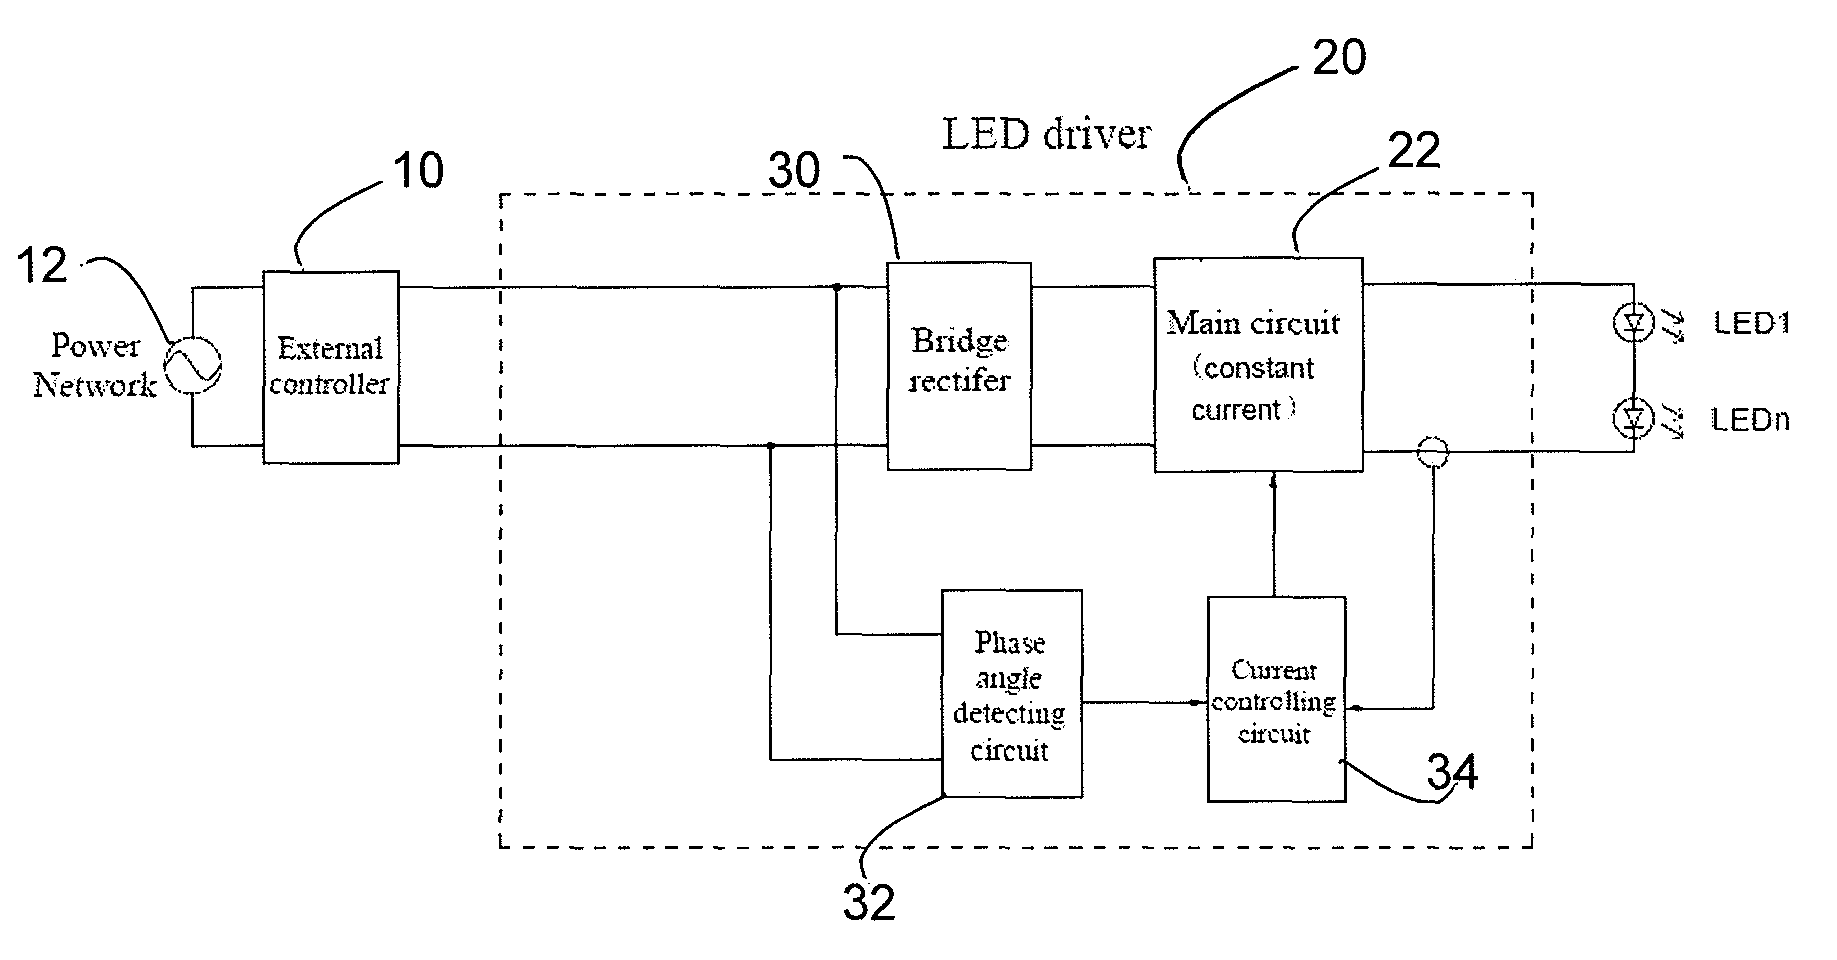 LED drive circuit for SCR dimming